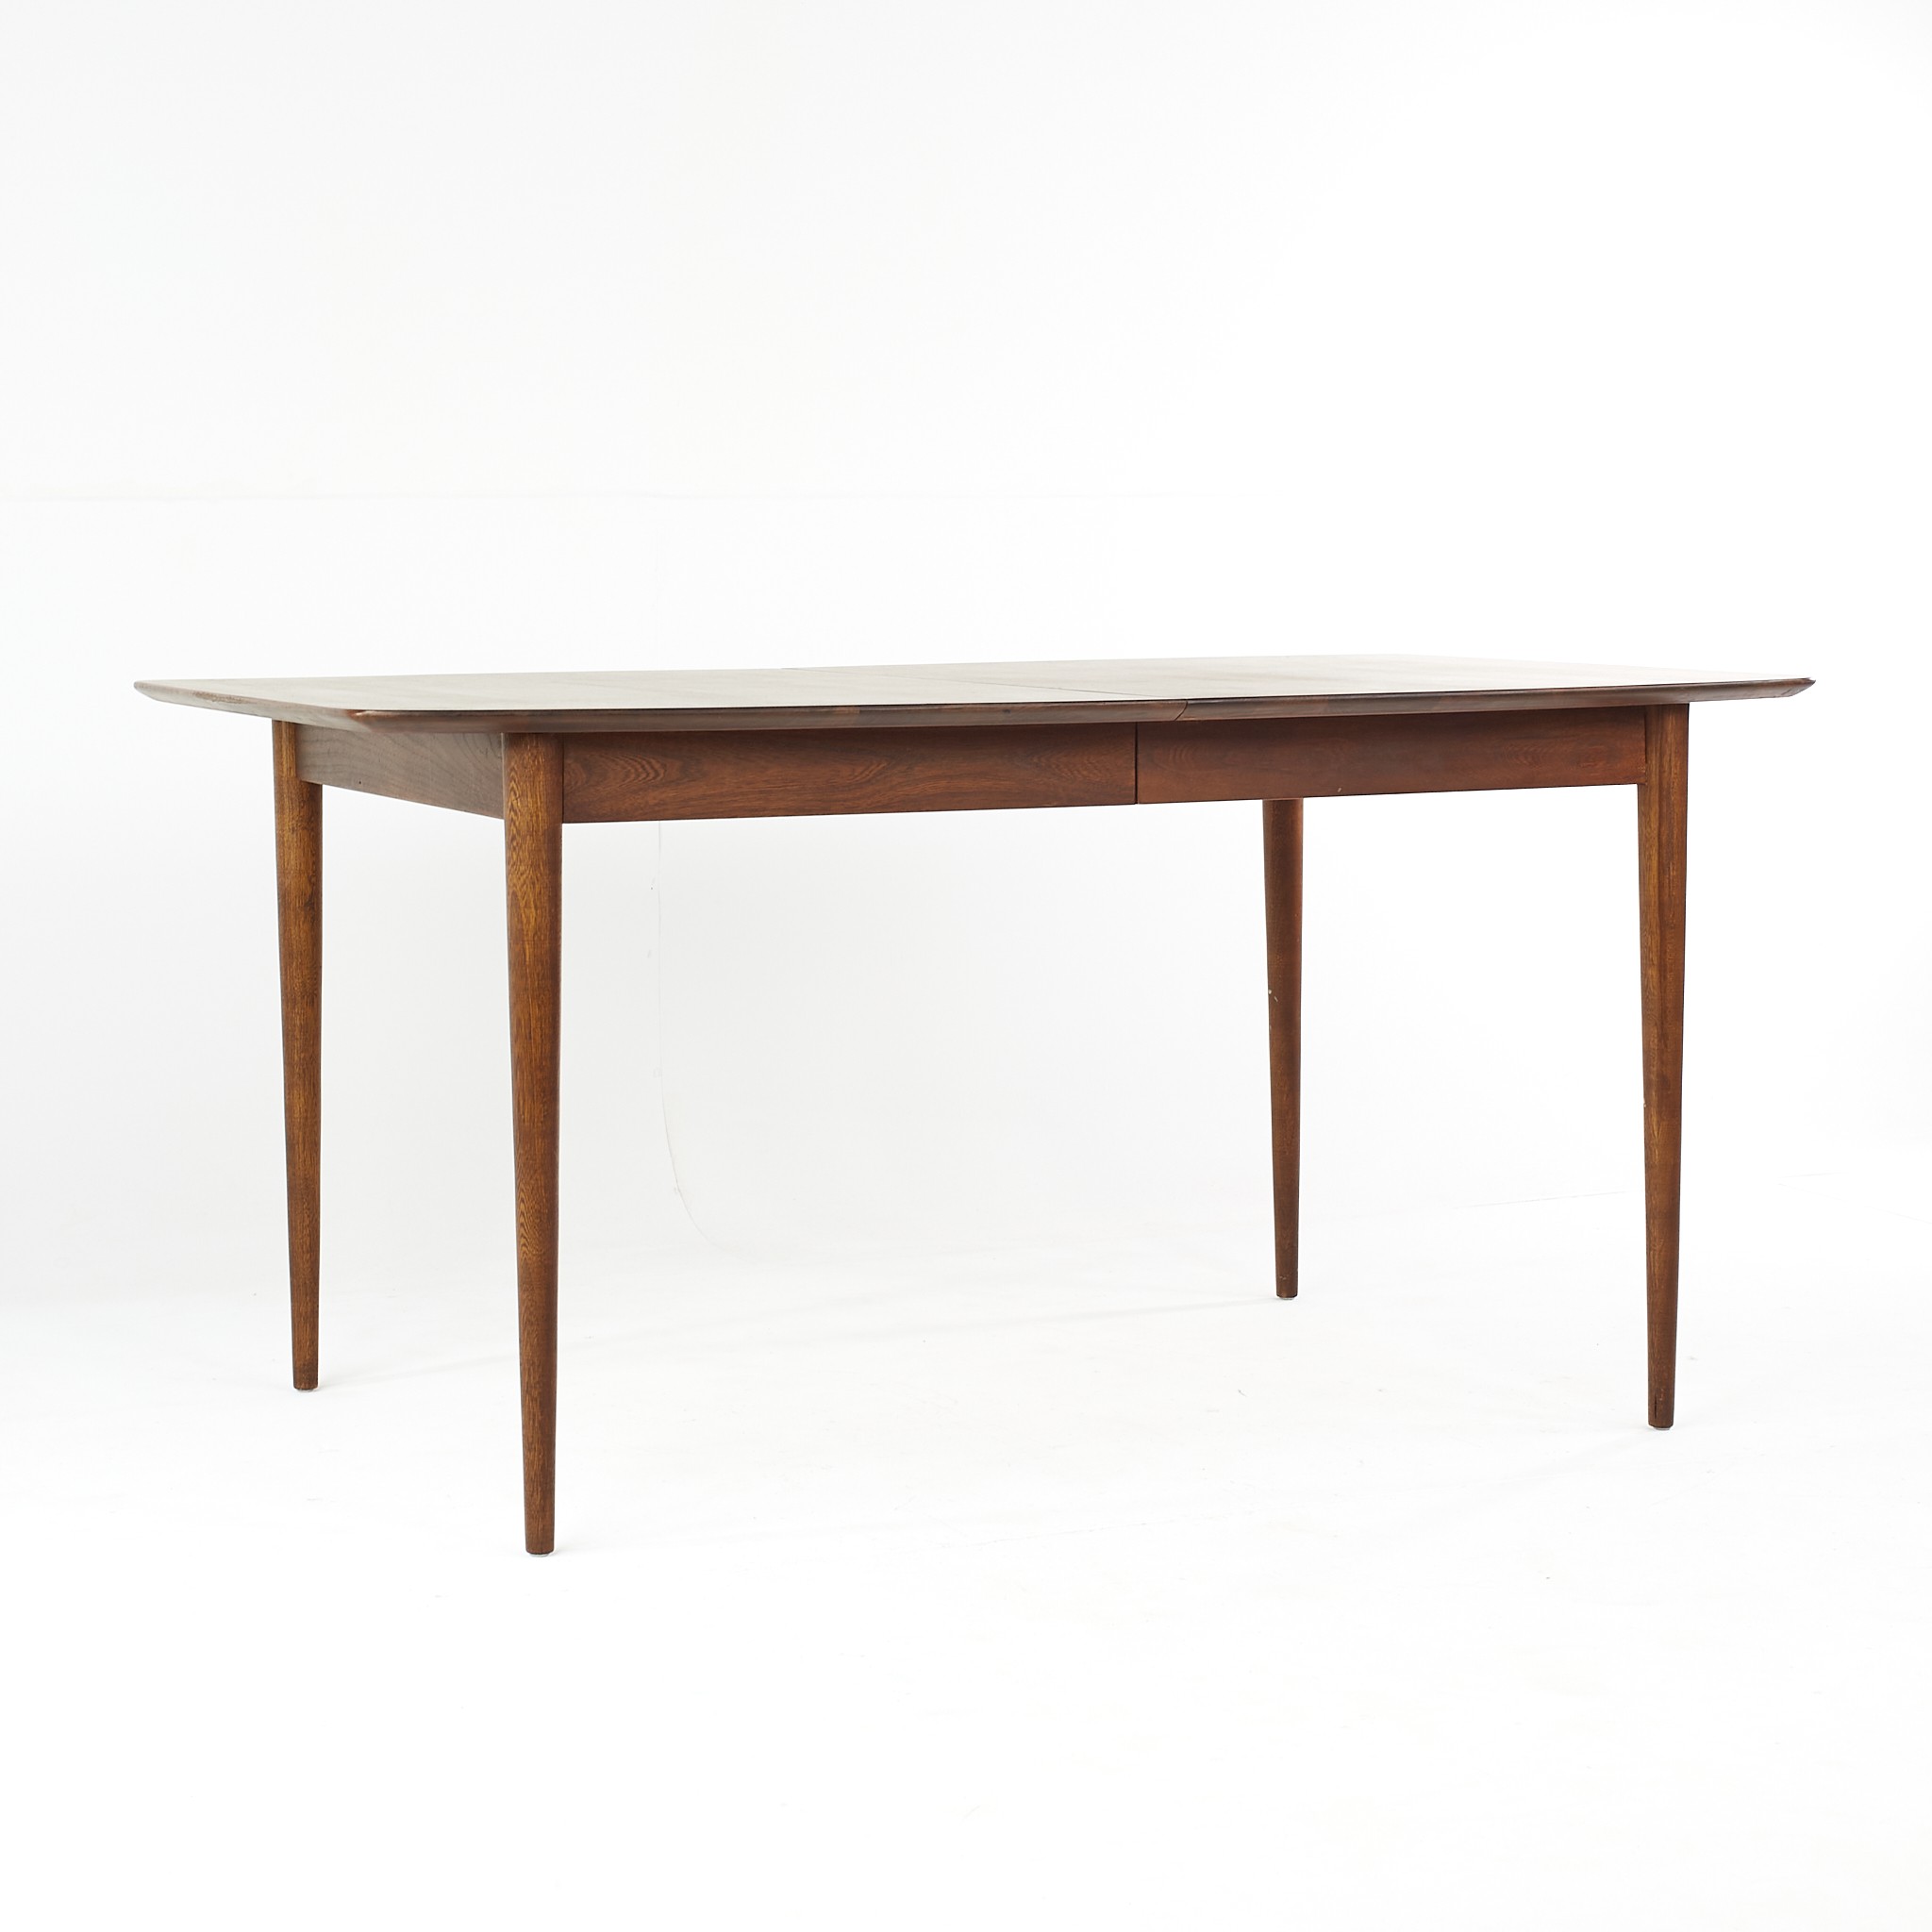 Merton Gershun for American of Martinsville Mid Century Walnut Expanding Dining Table with Inlay Including 3 Leaves